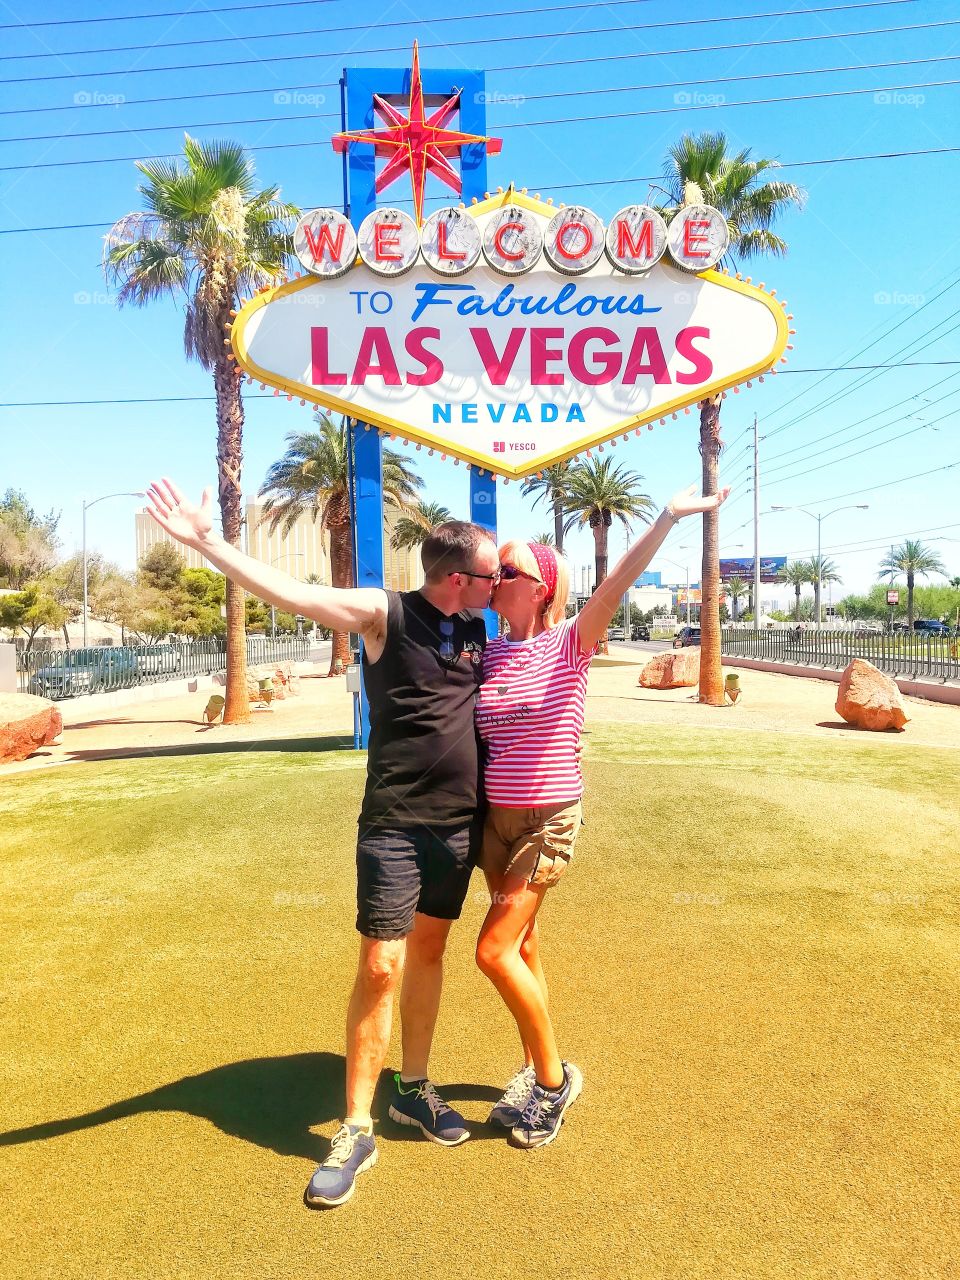 Selfie Las Vegas. selfie, travel, sign, vacation, people, tourism, usa, happy, welcome, nevada, lifestyle, strip, american, tourist, smiling, fun, fabulous, las vegas, together, beautiful, summer, girl, vegas, leisure, group, young, holidays, love, l